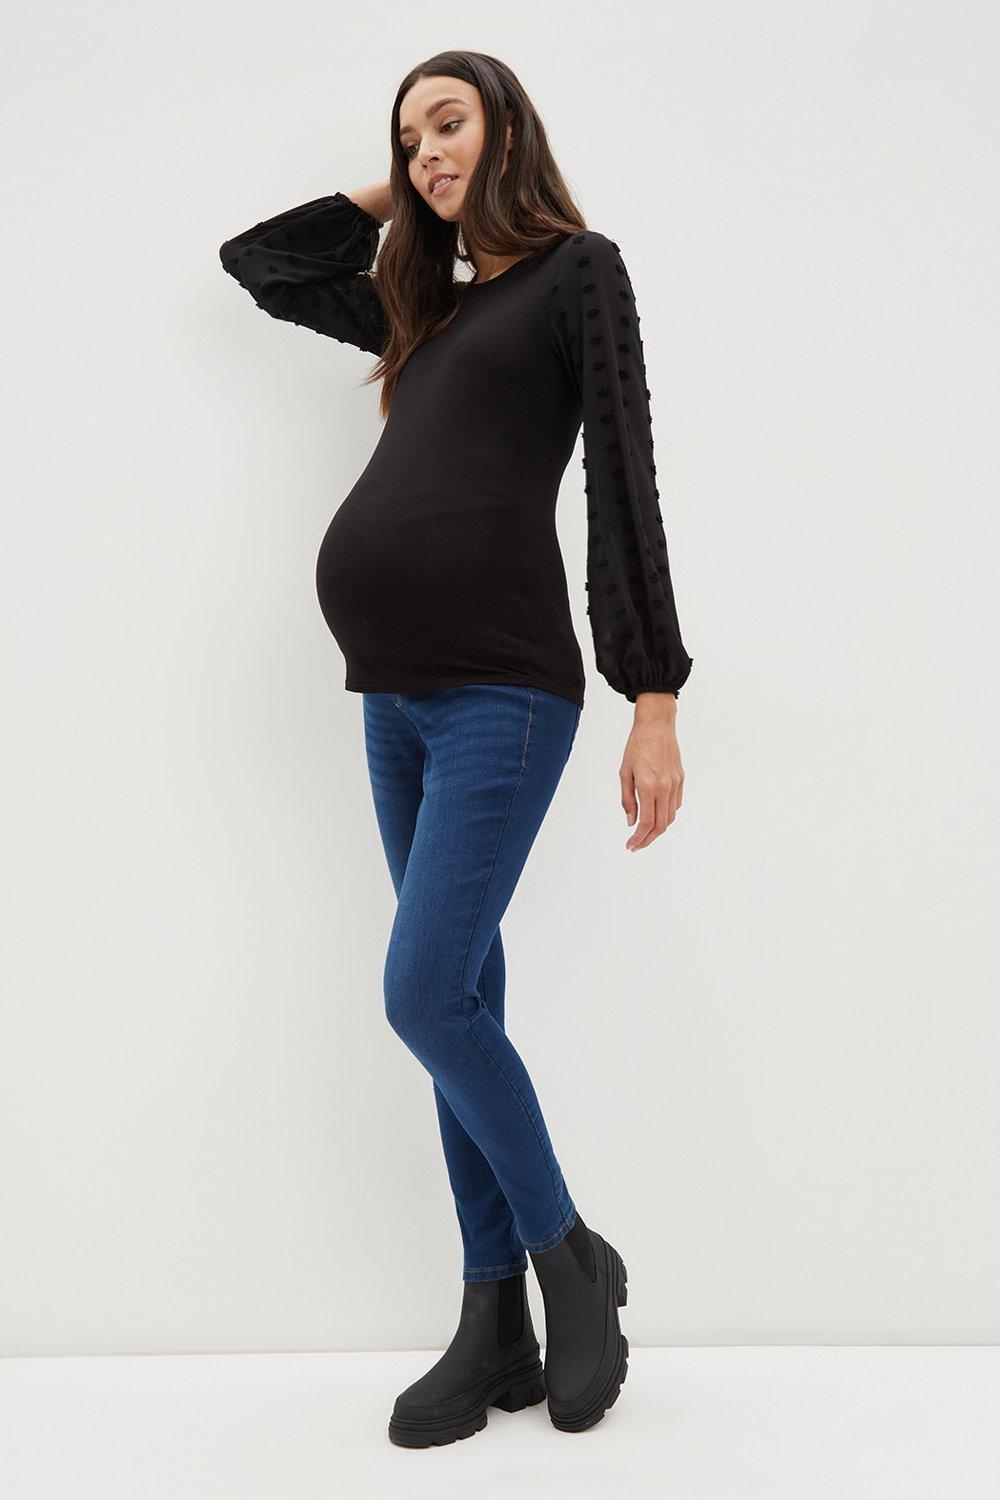 Womens Maternity Black Top with Woven Spot Textured Sleeve